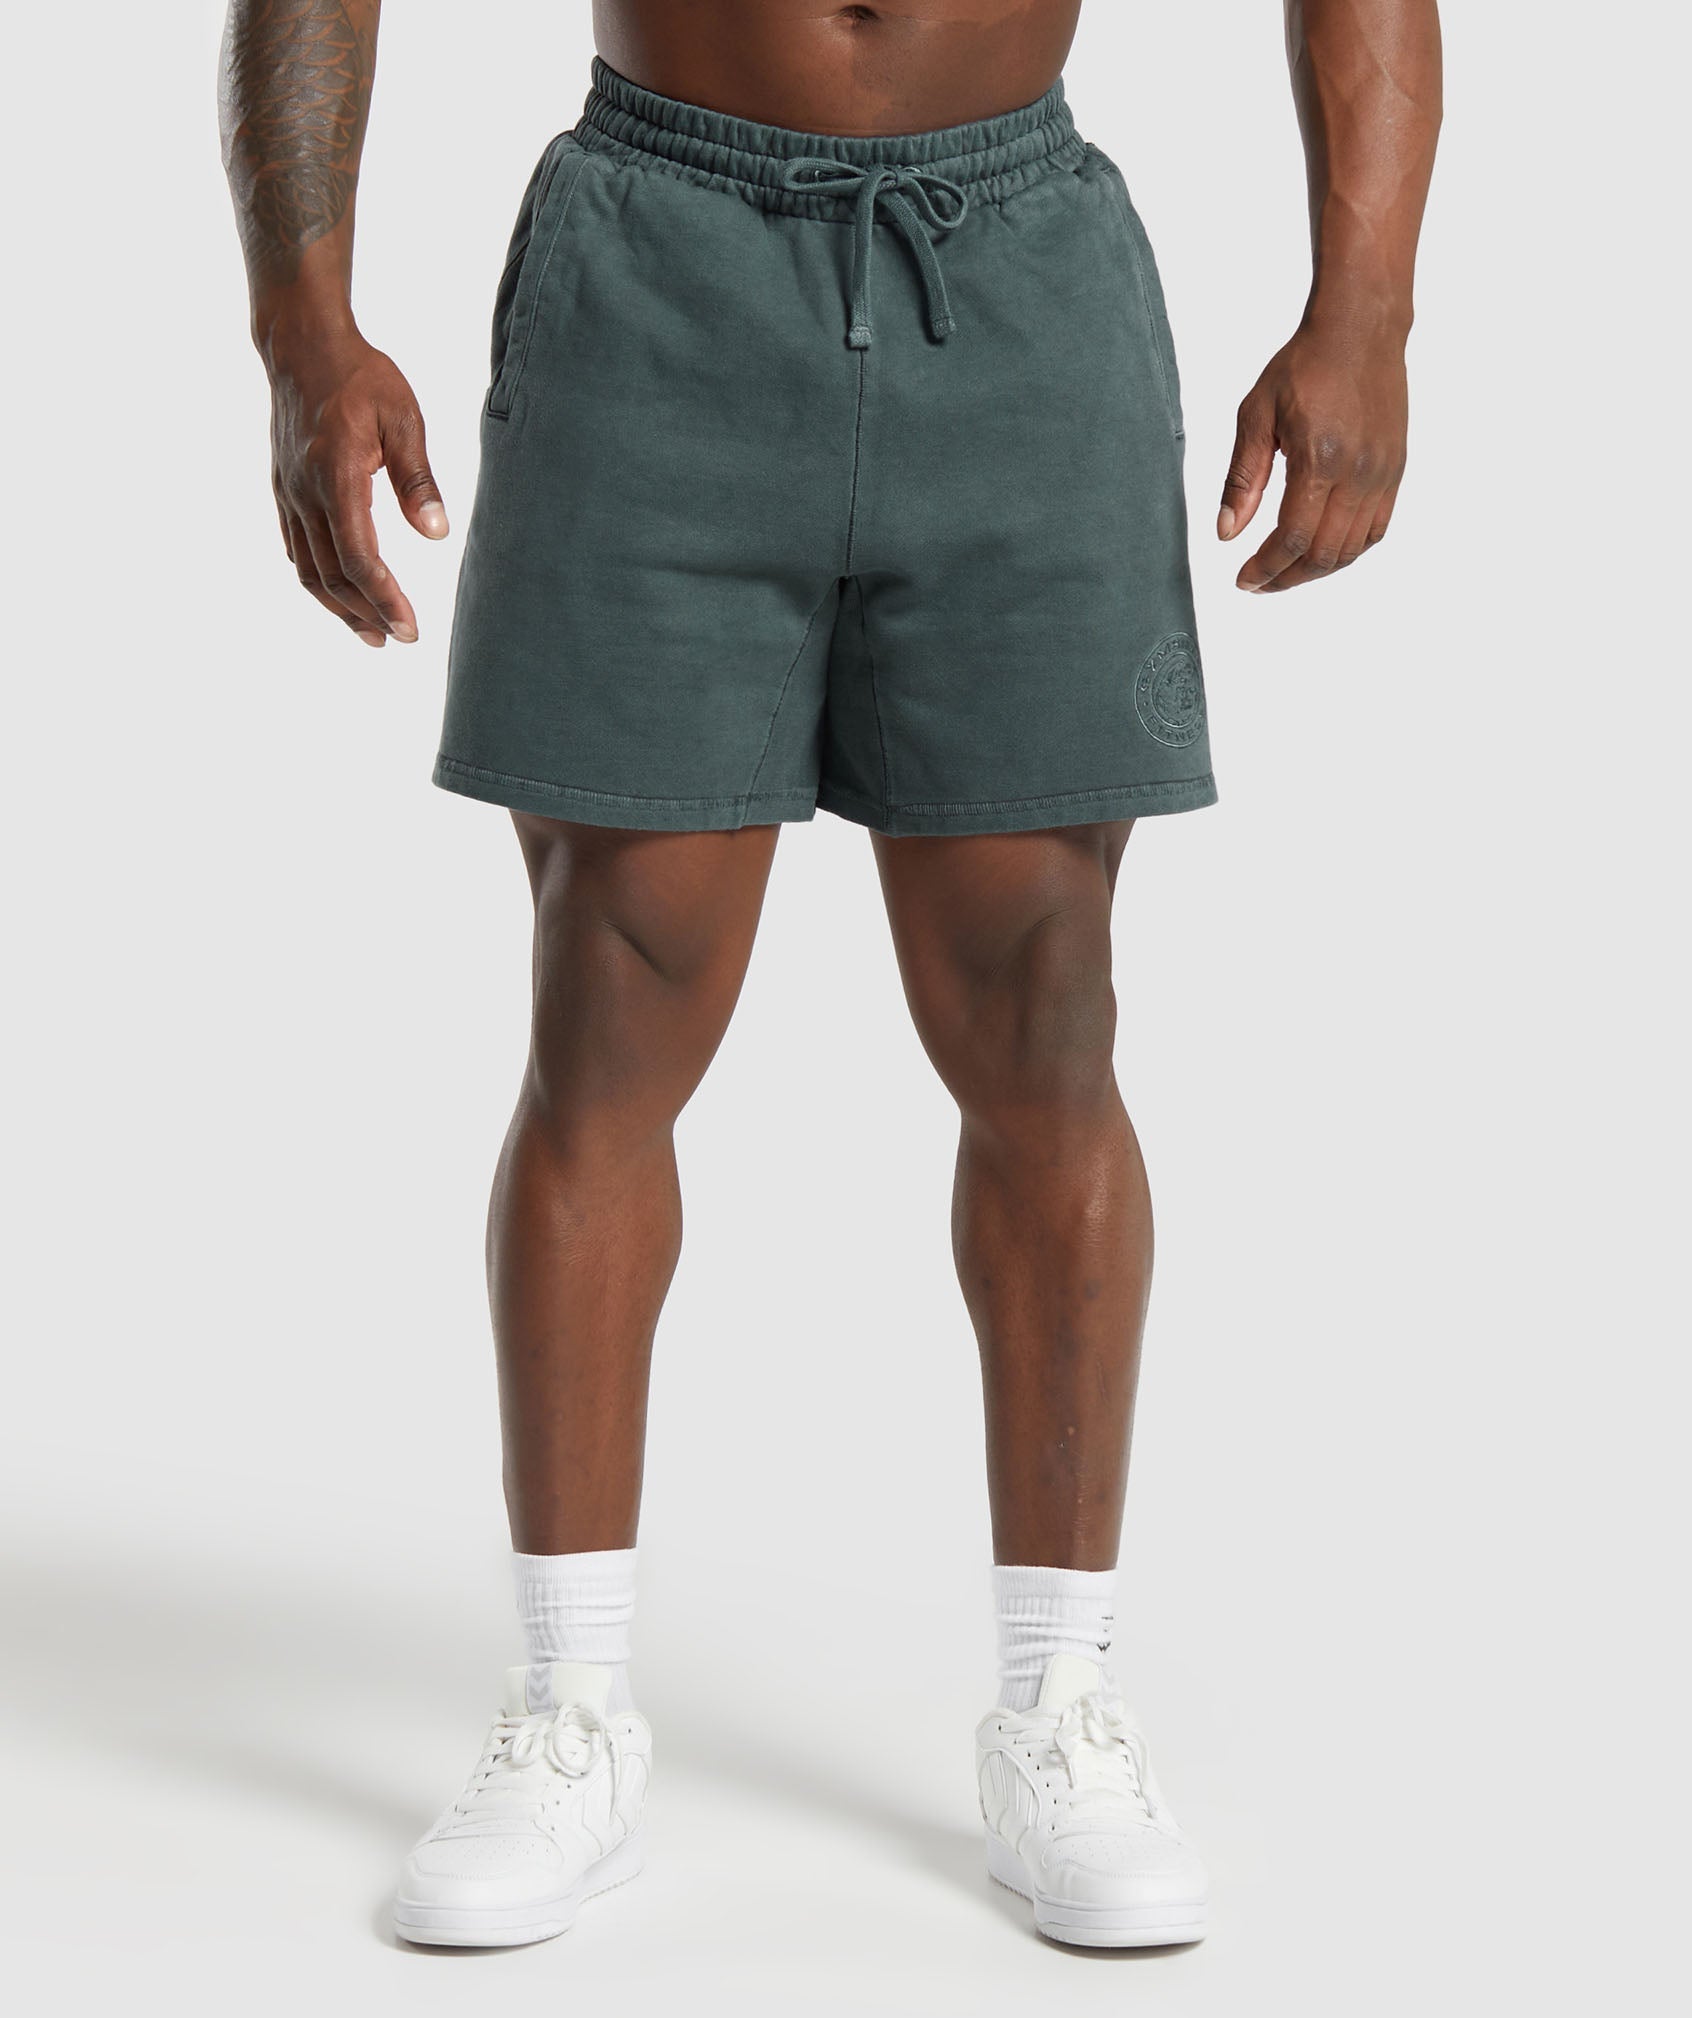 Premium Legacy Shorts in Cargo Teal - view 1